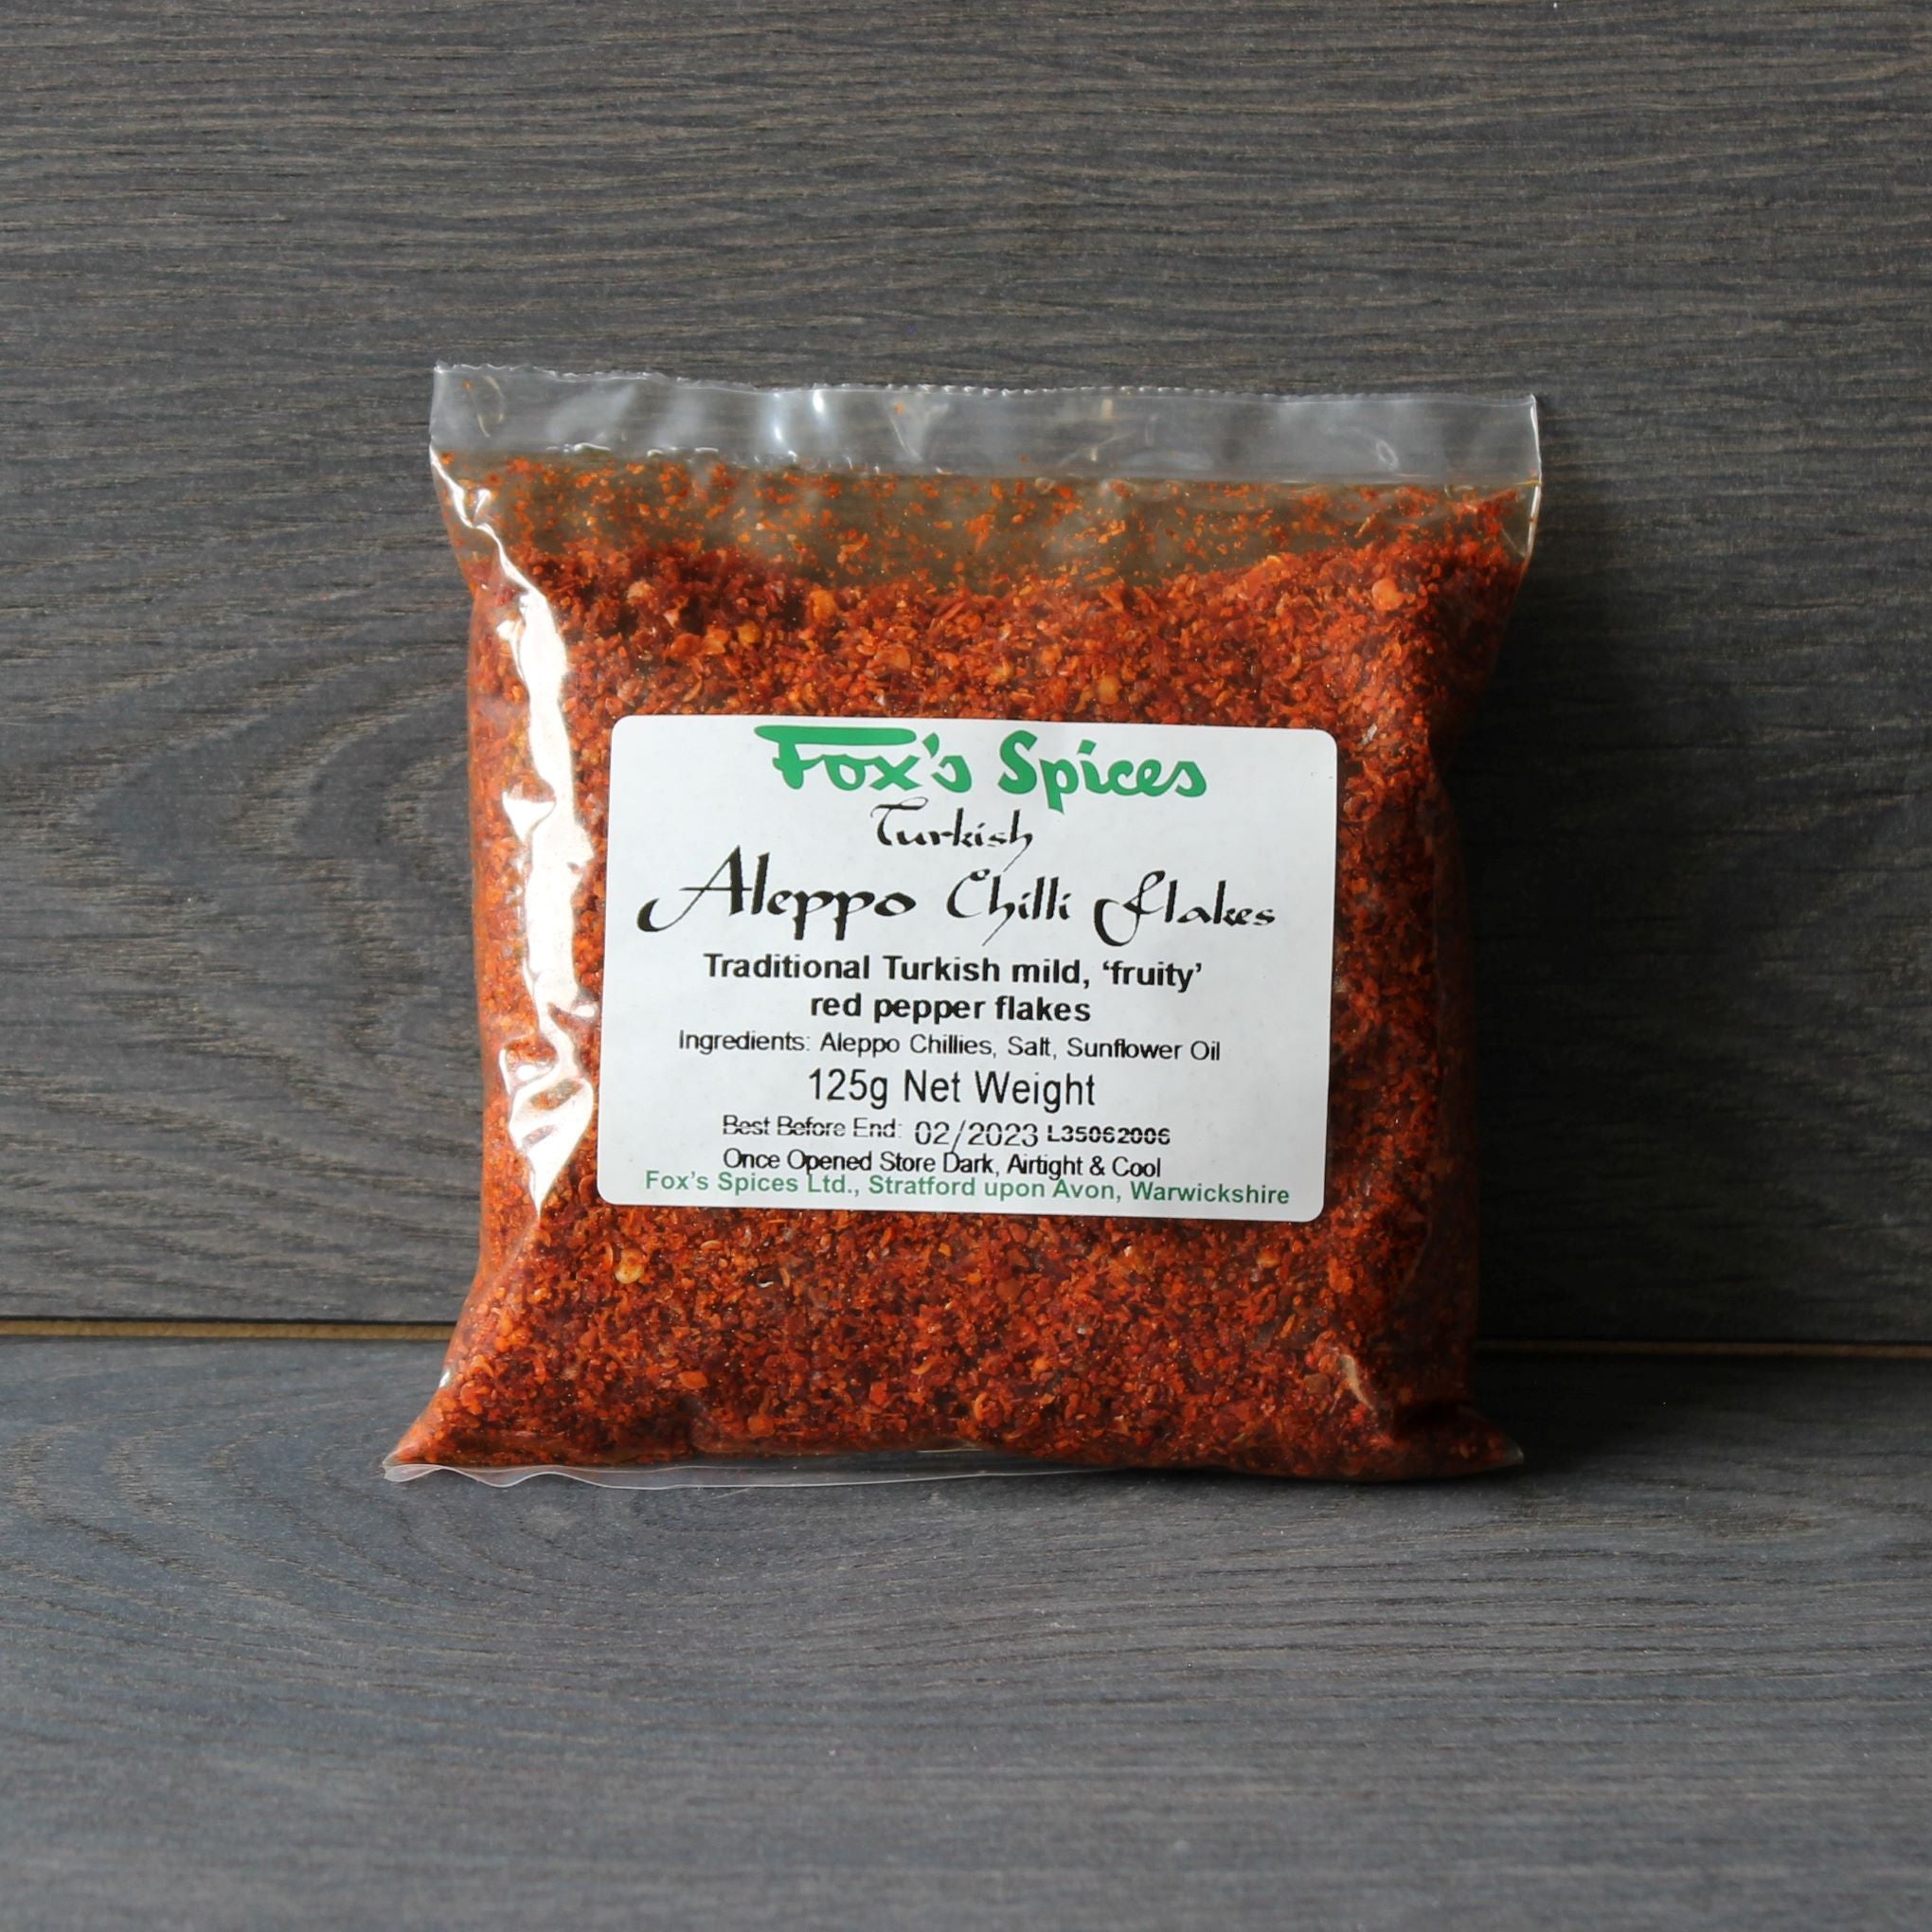 a bag of Turkish Aleppo chilli flakes from Fox's Spices